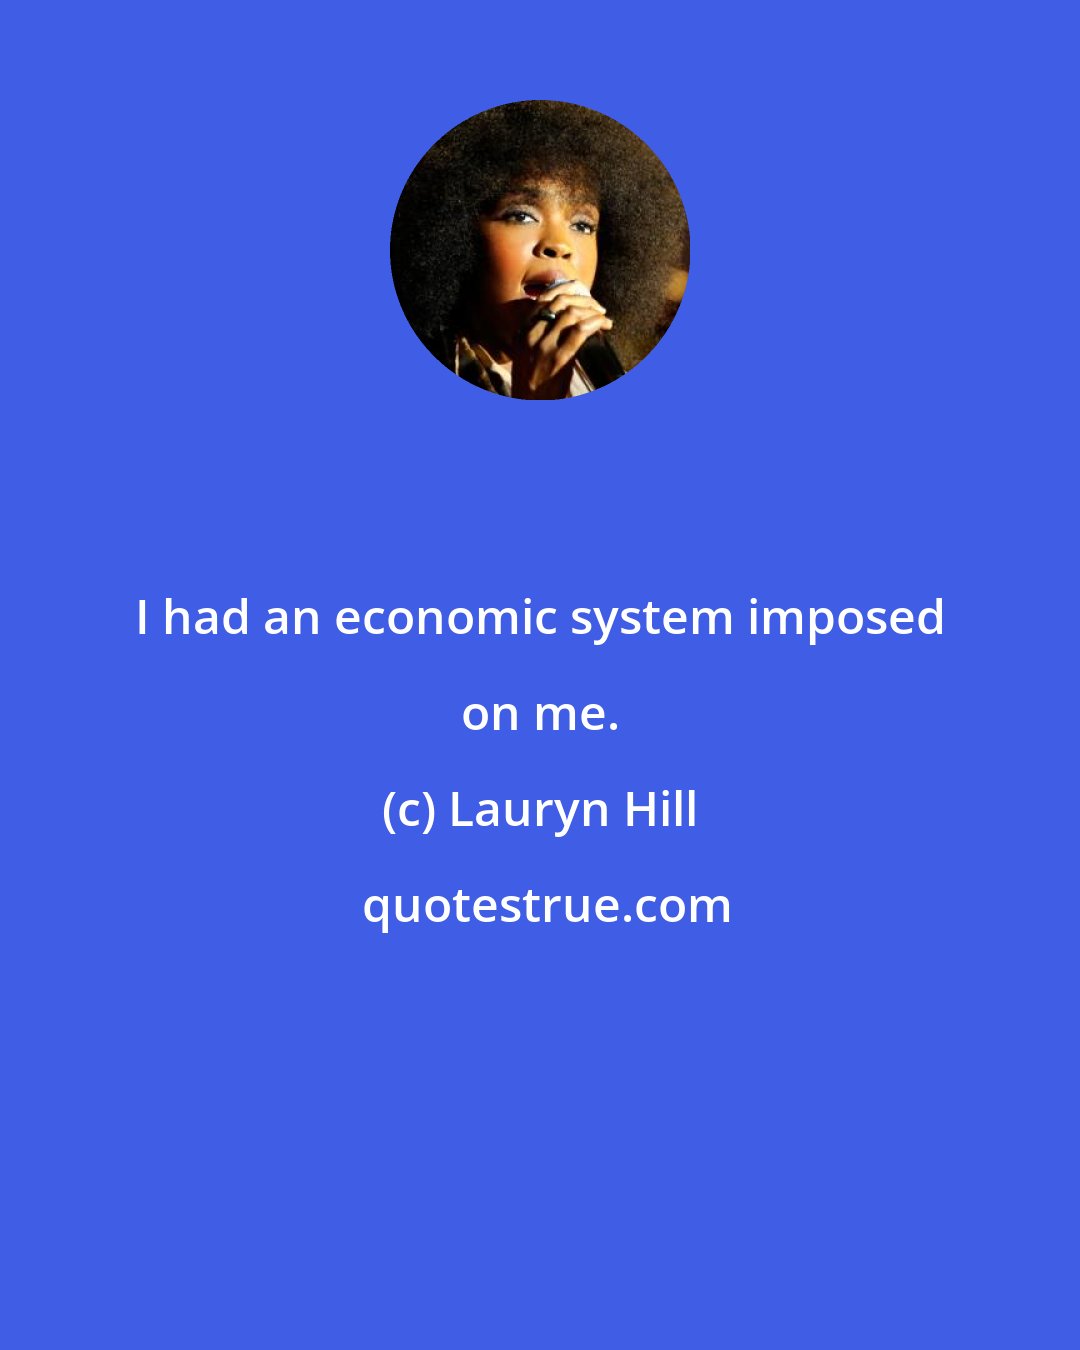 Lauryn Hill: I had an economic system imposed on me.